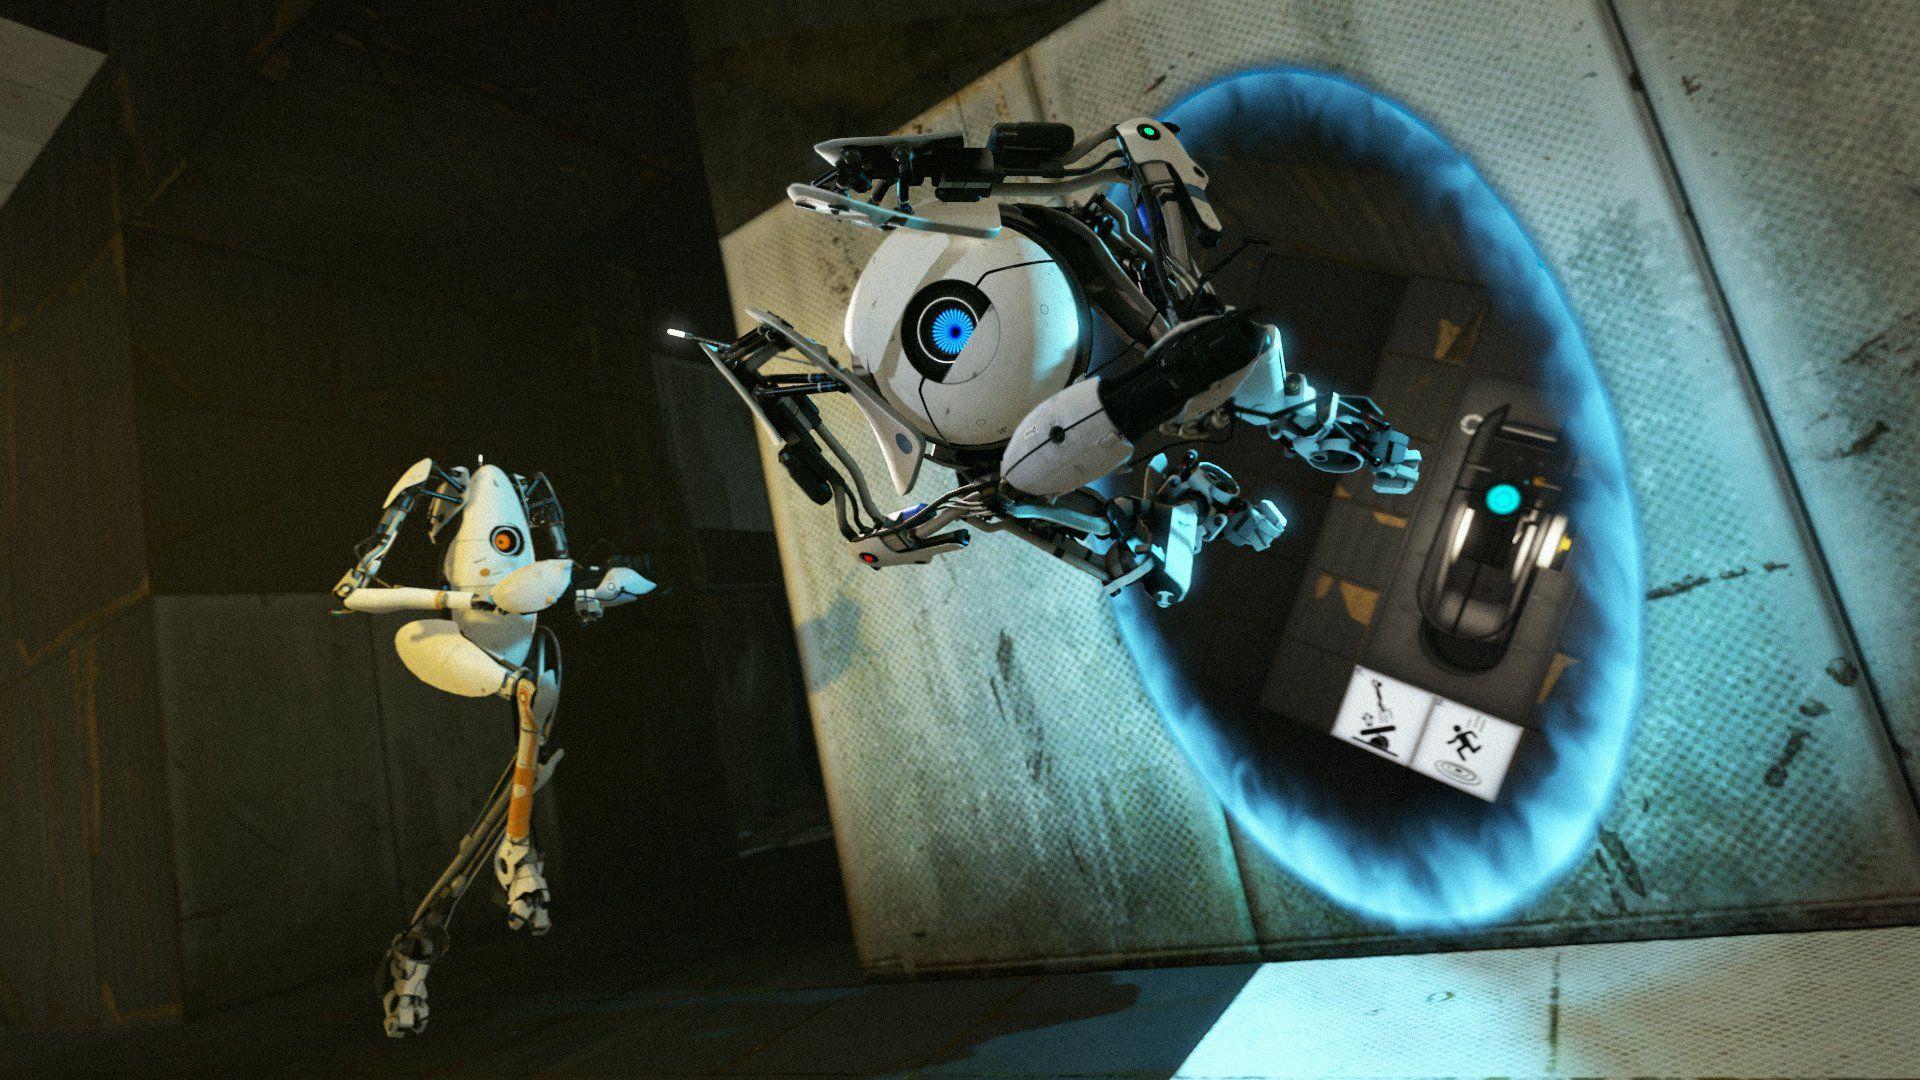 Portal 2 HD Wallpaper and Background Image